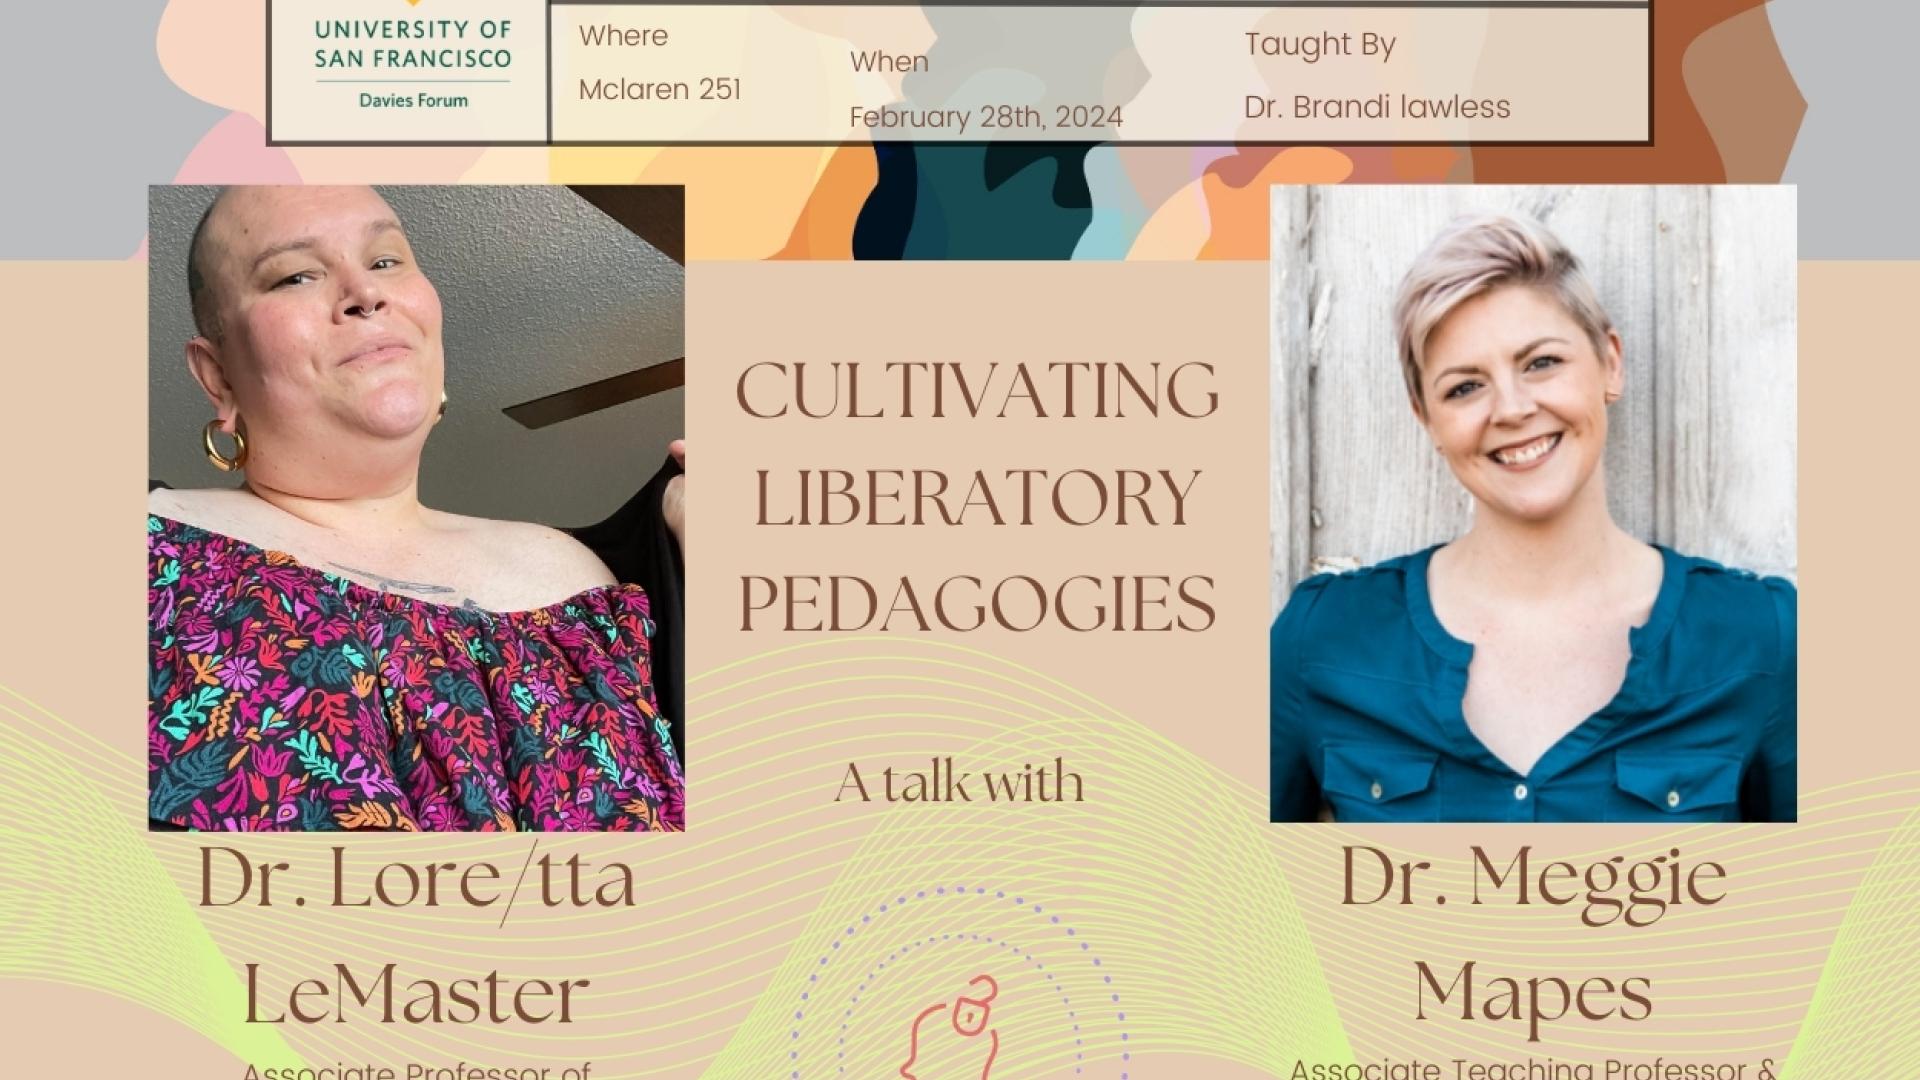 Cultivating Liberatory Pedagogies with Dr. Lore/tta LeMaster & Dr. Meggie Mapes